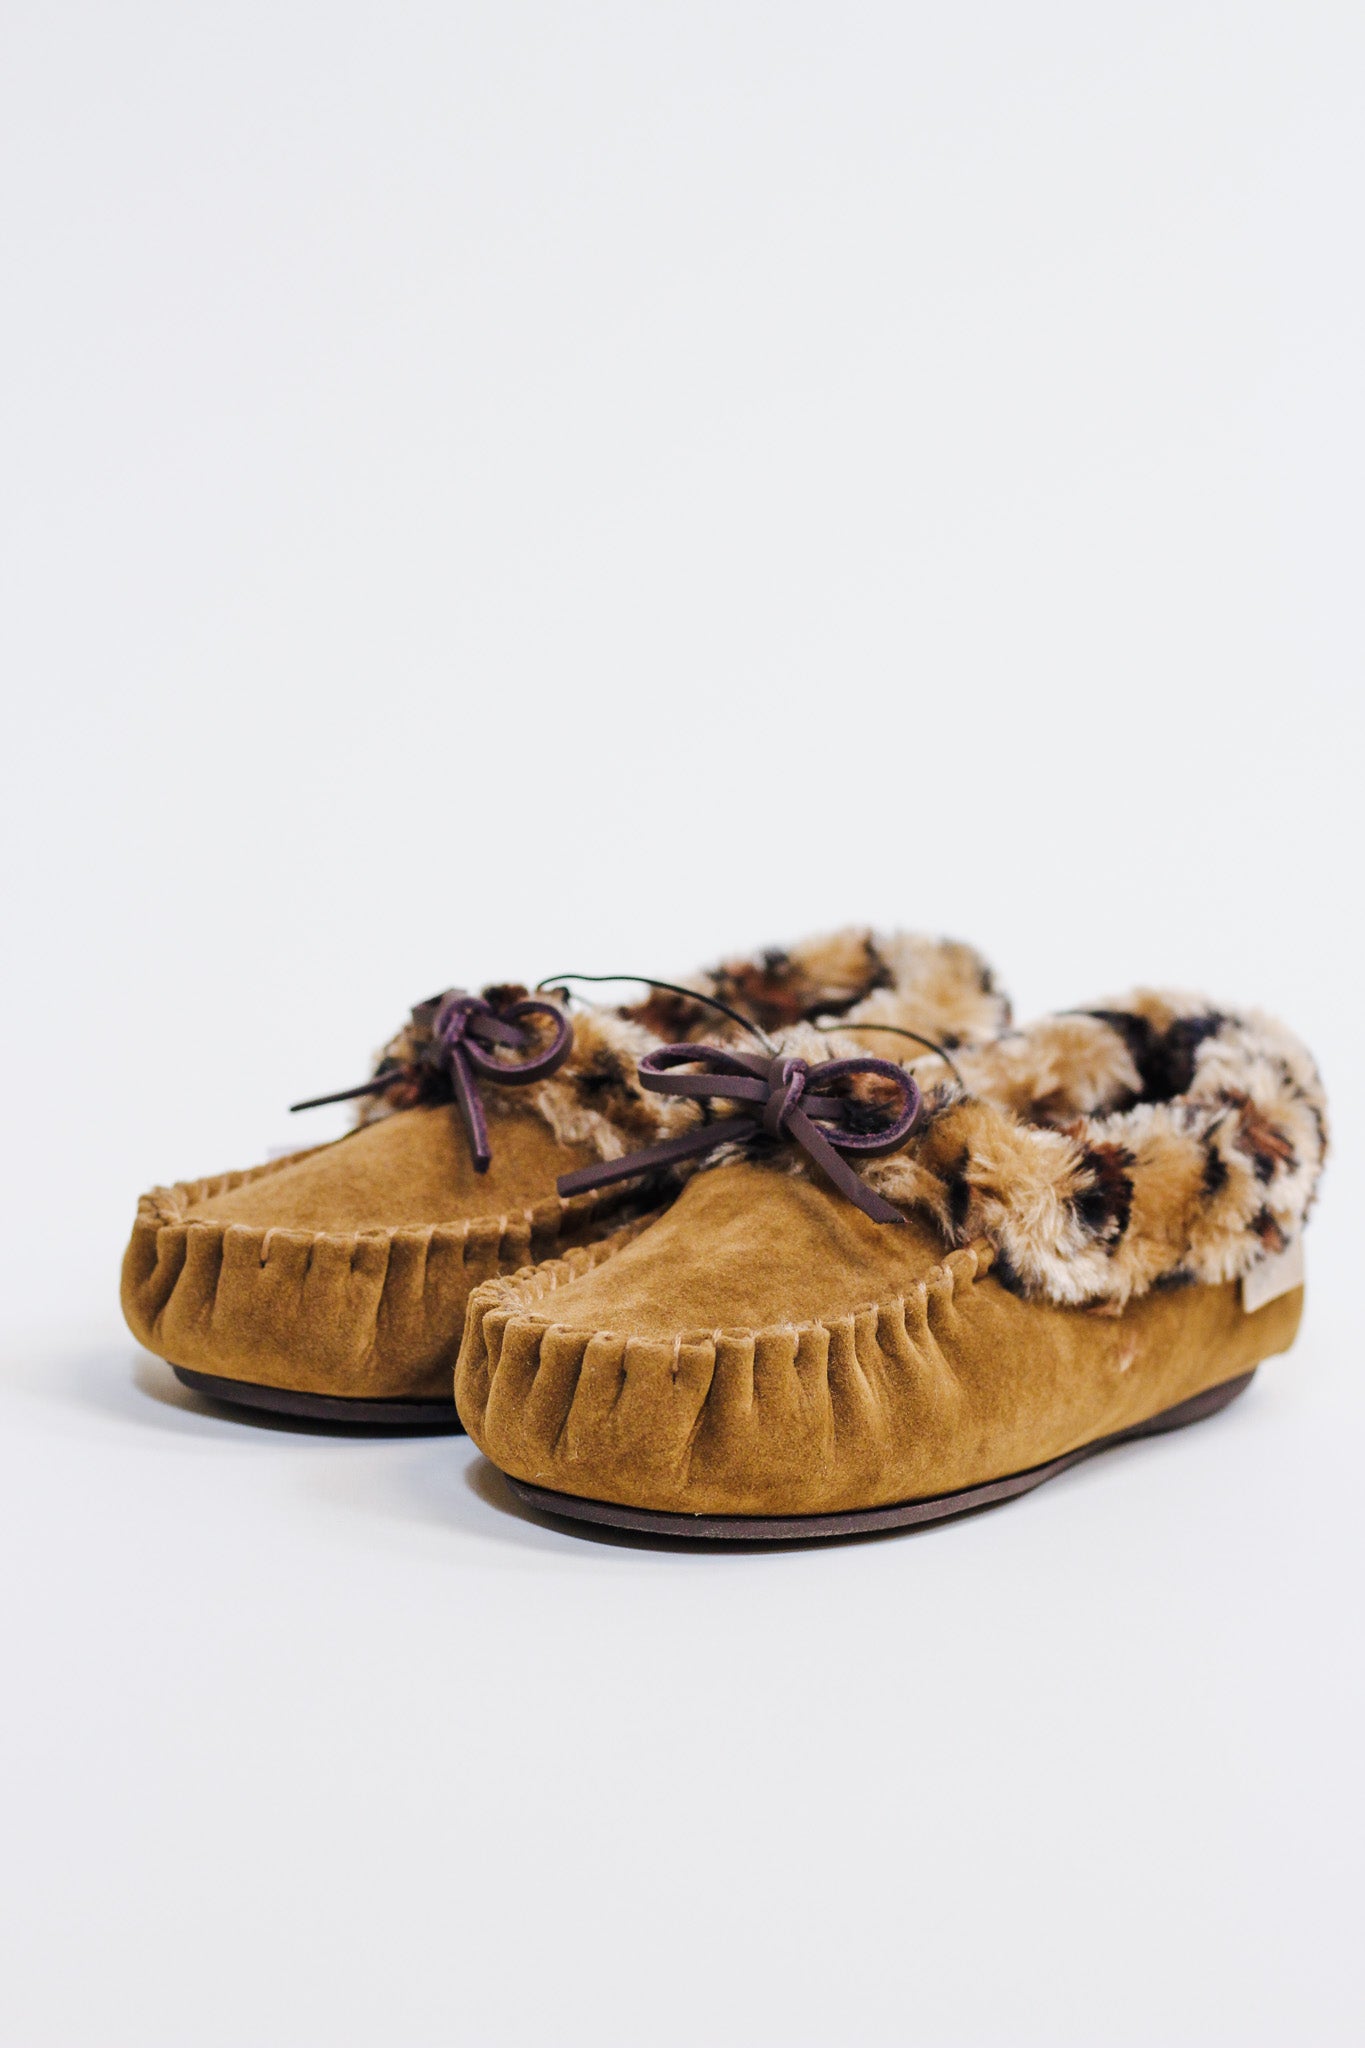 Brown Leopard Slippers